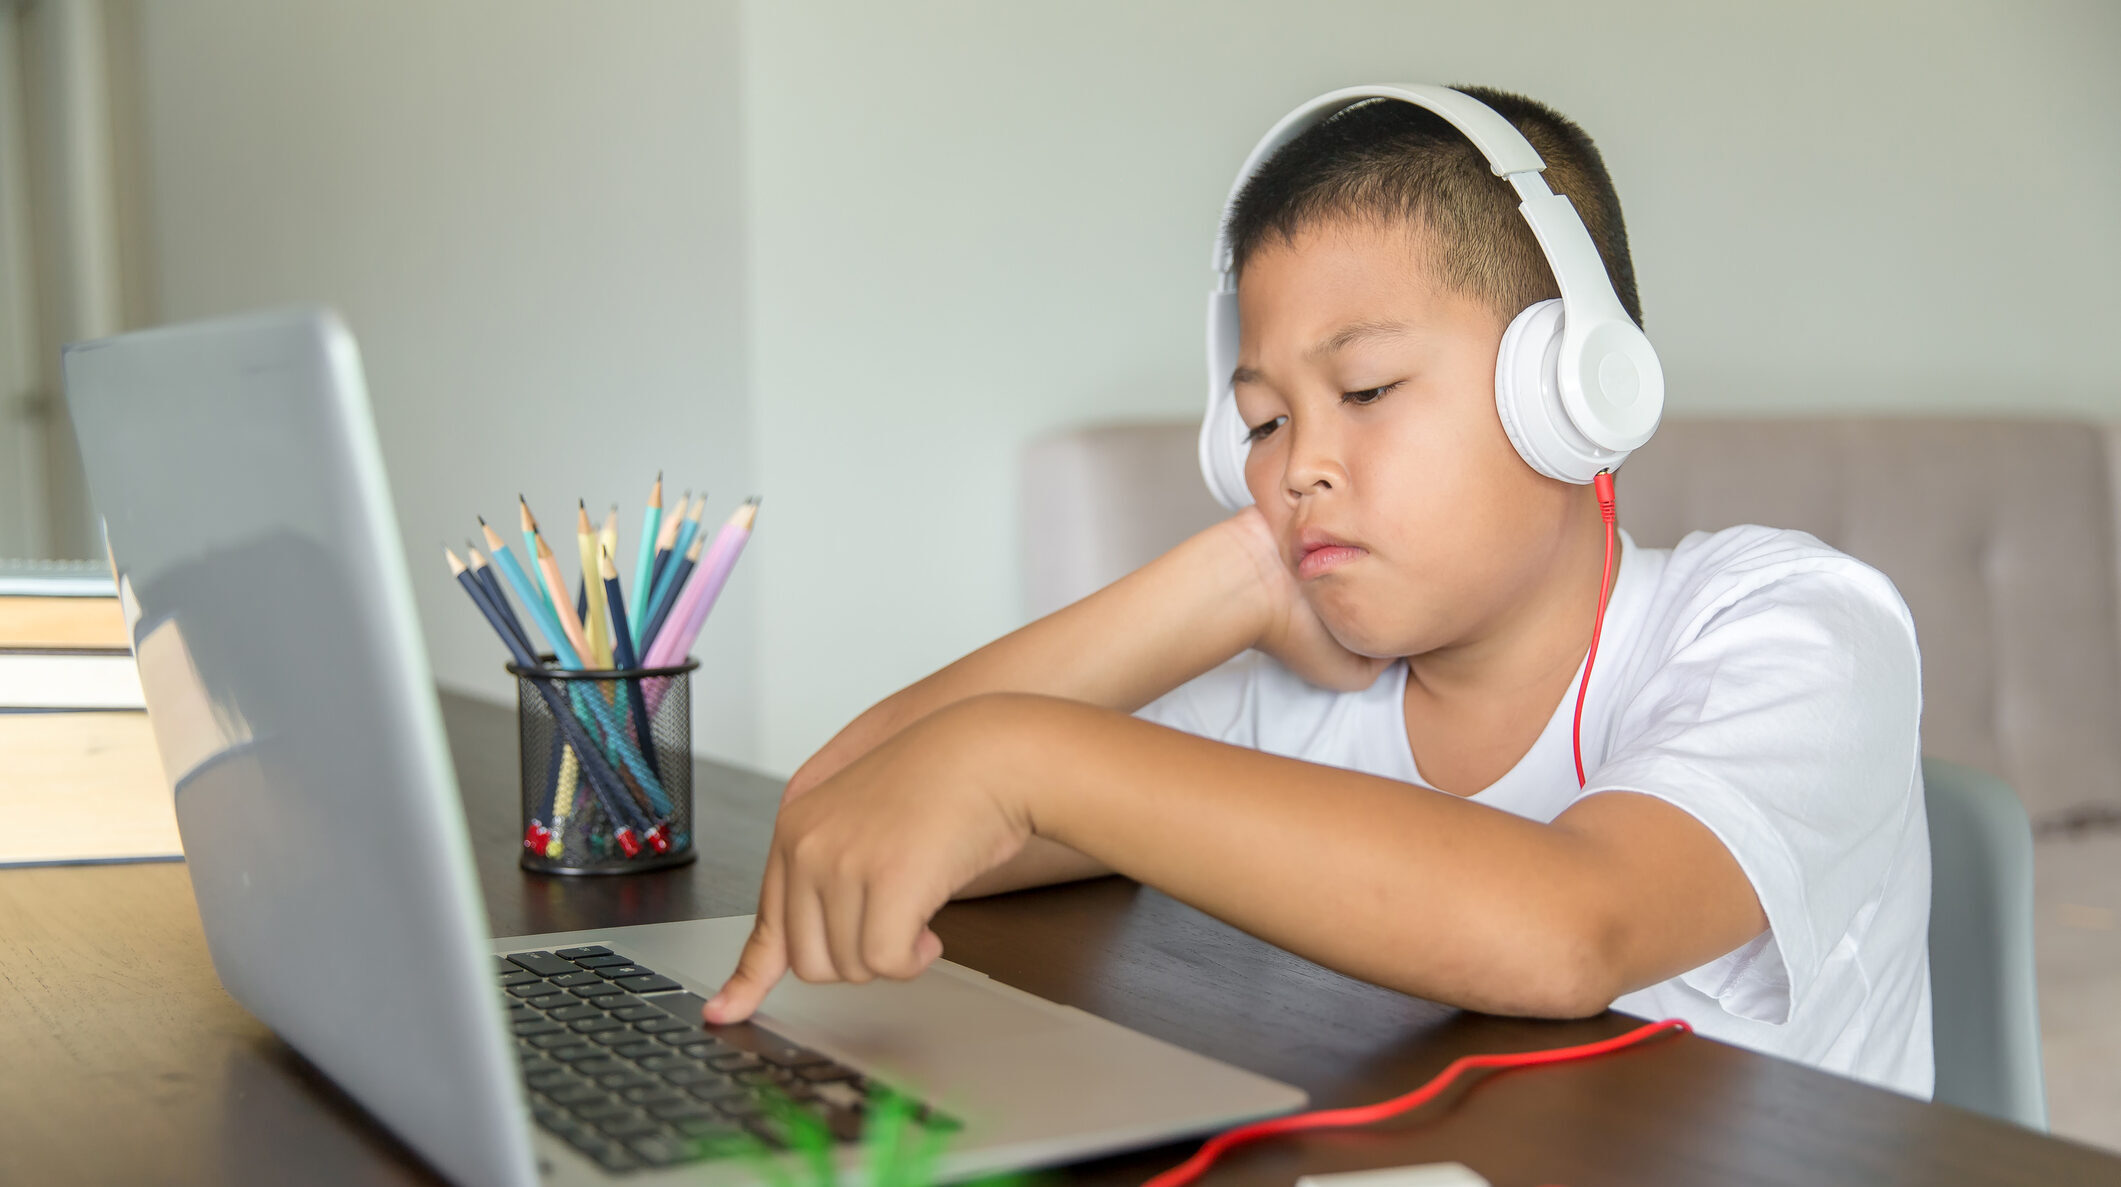 the photo shows a boy with short dark hair who is wearing white headphones and pressing the space bar on a laptop computer